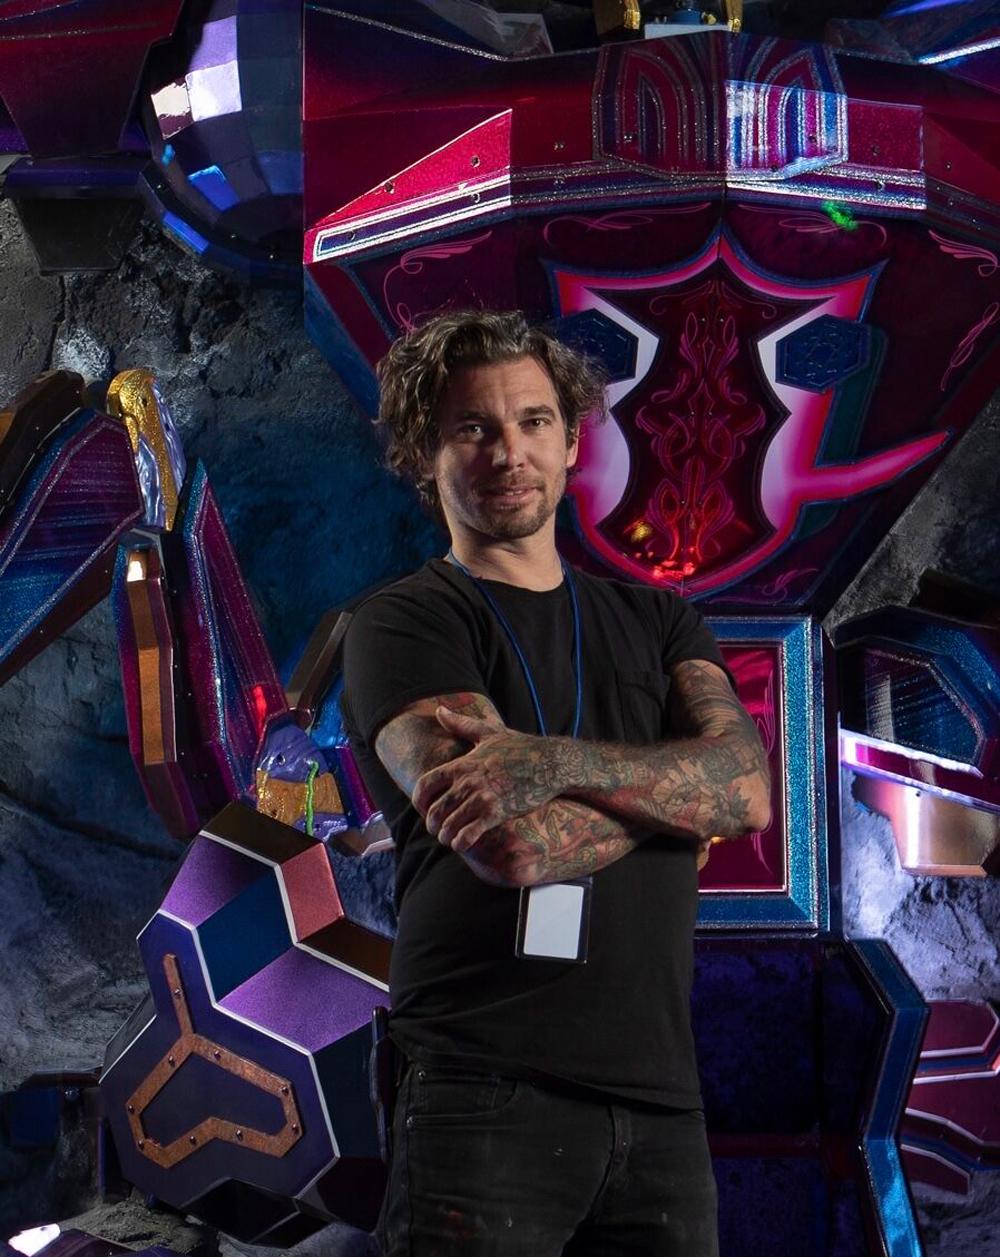 King was an instrumental figure behind the company, which was launched in 2008 / Meow Wolf/Vince Kadlubek/LinkedIn